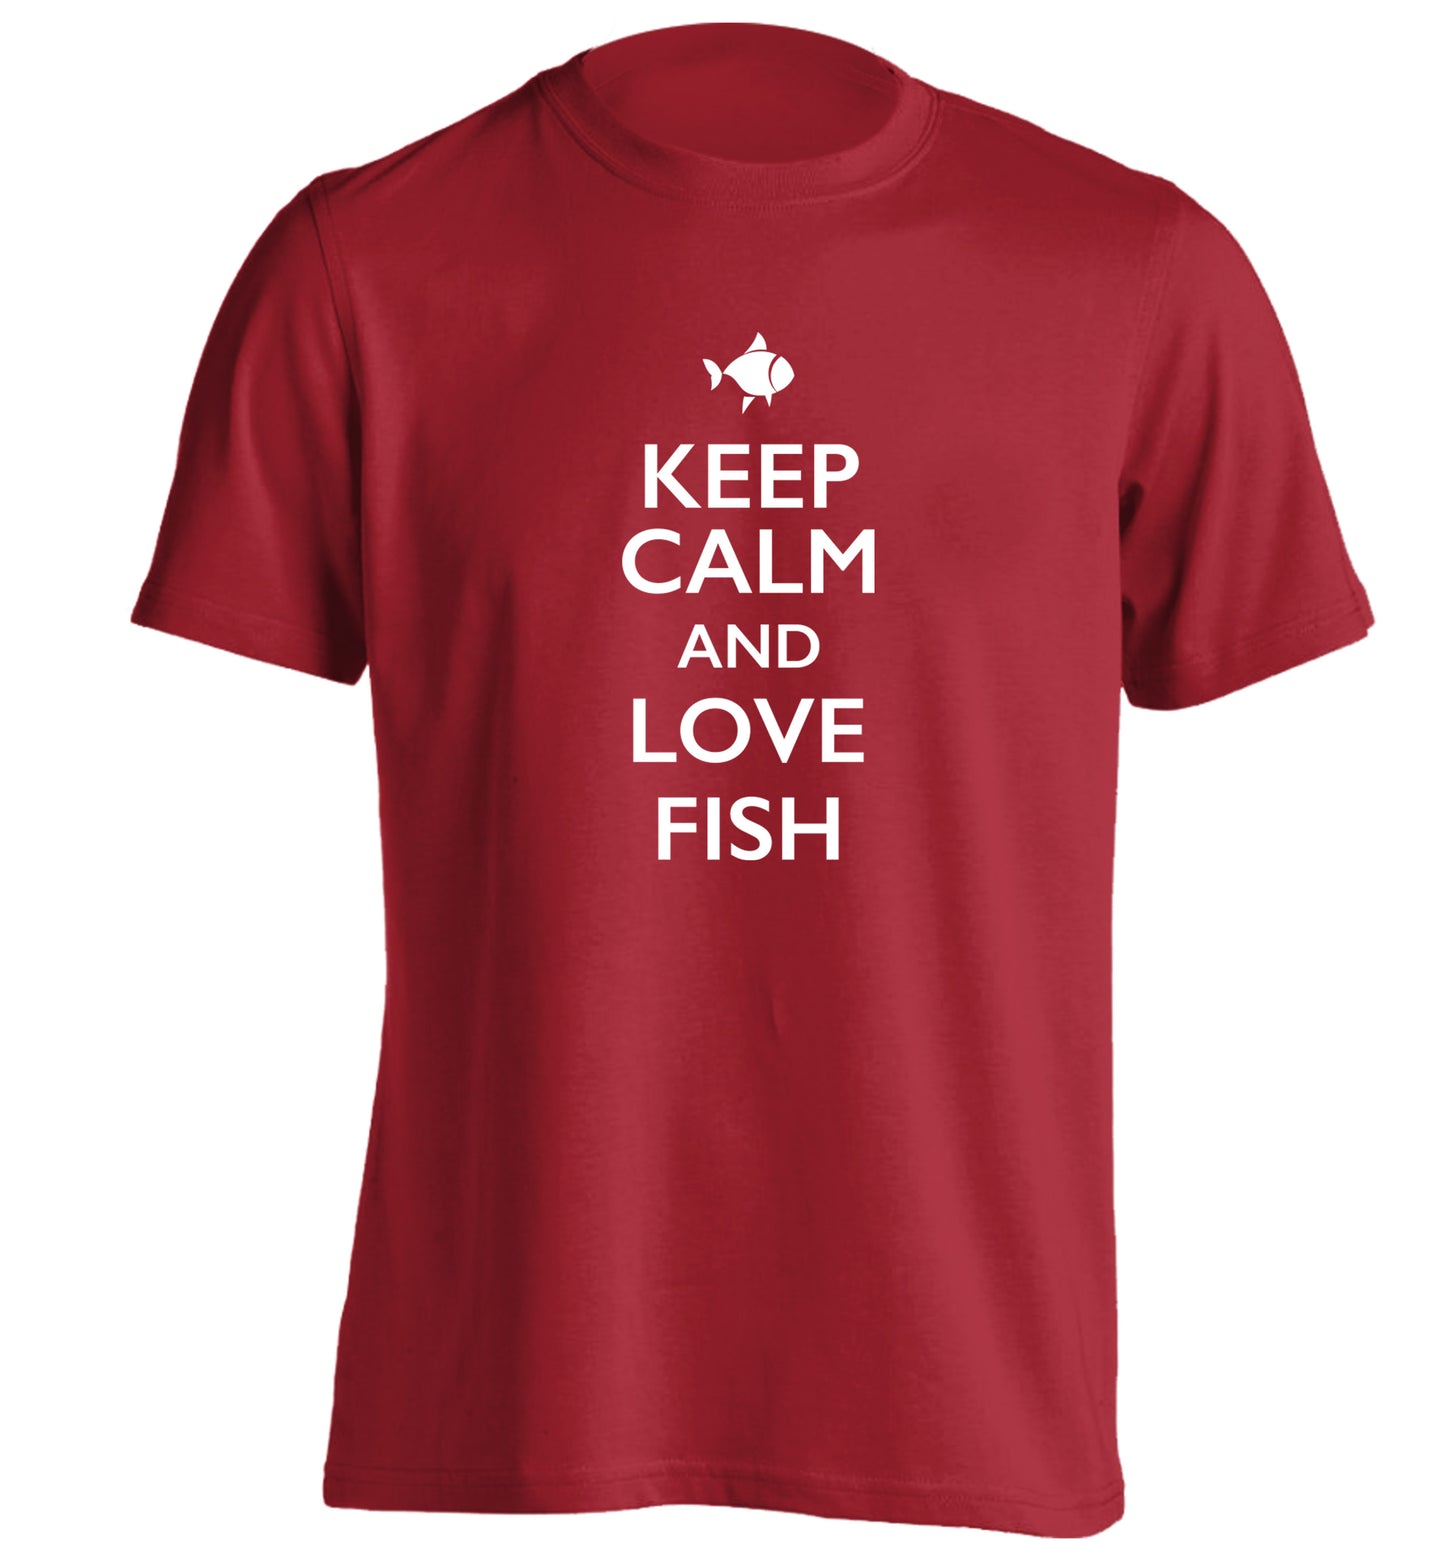 Keep calm and love fish adults unisex red Tshirt 2XL